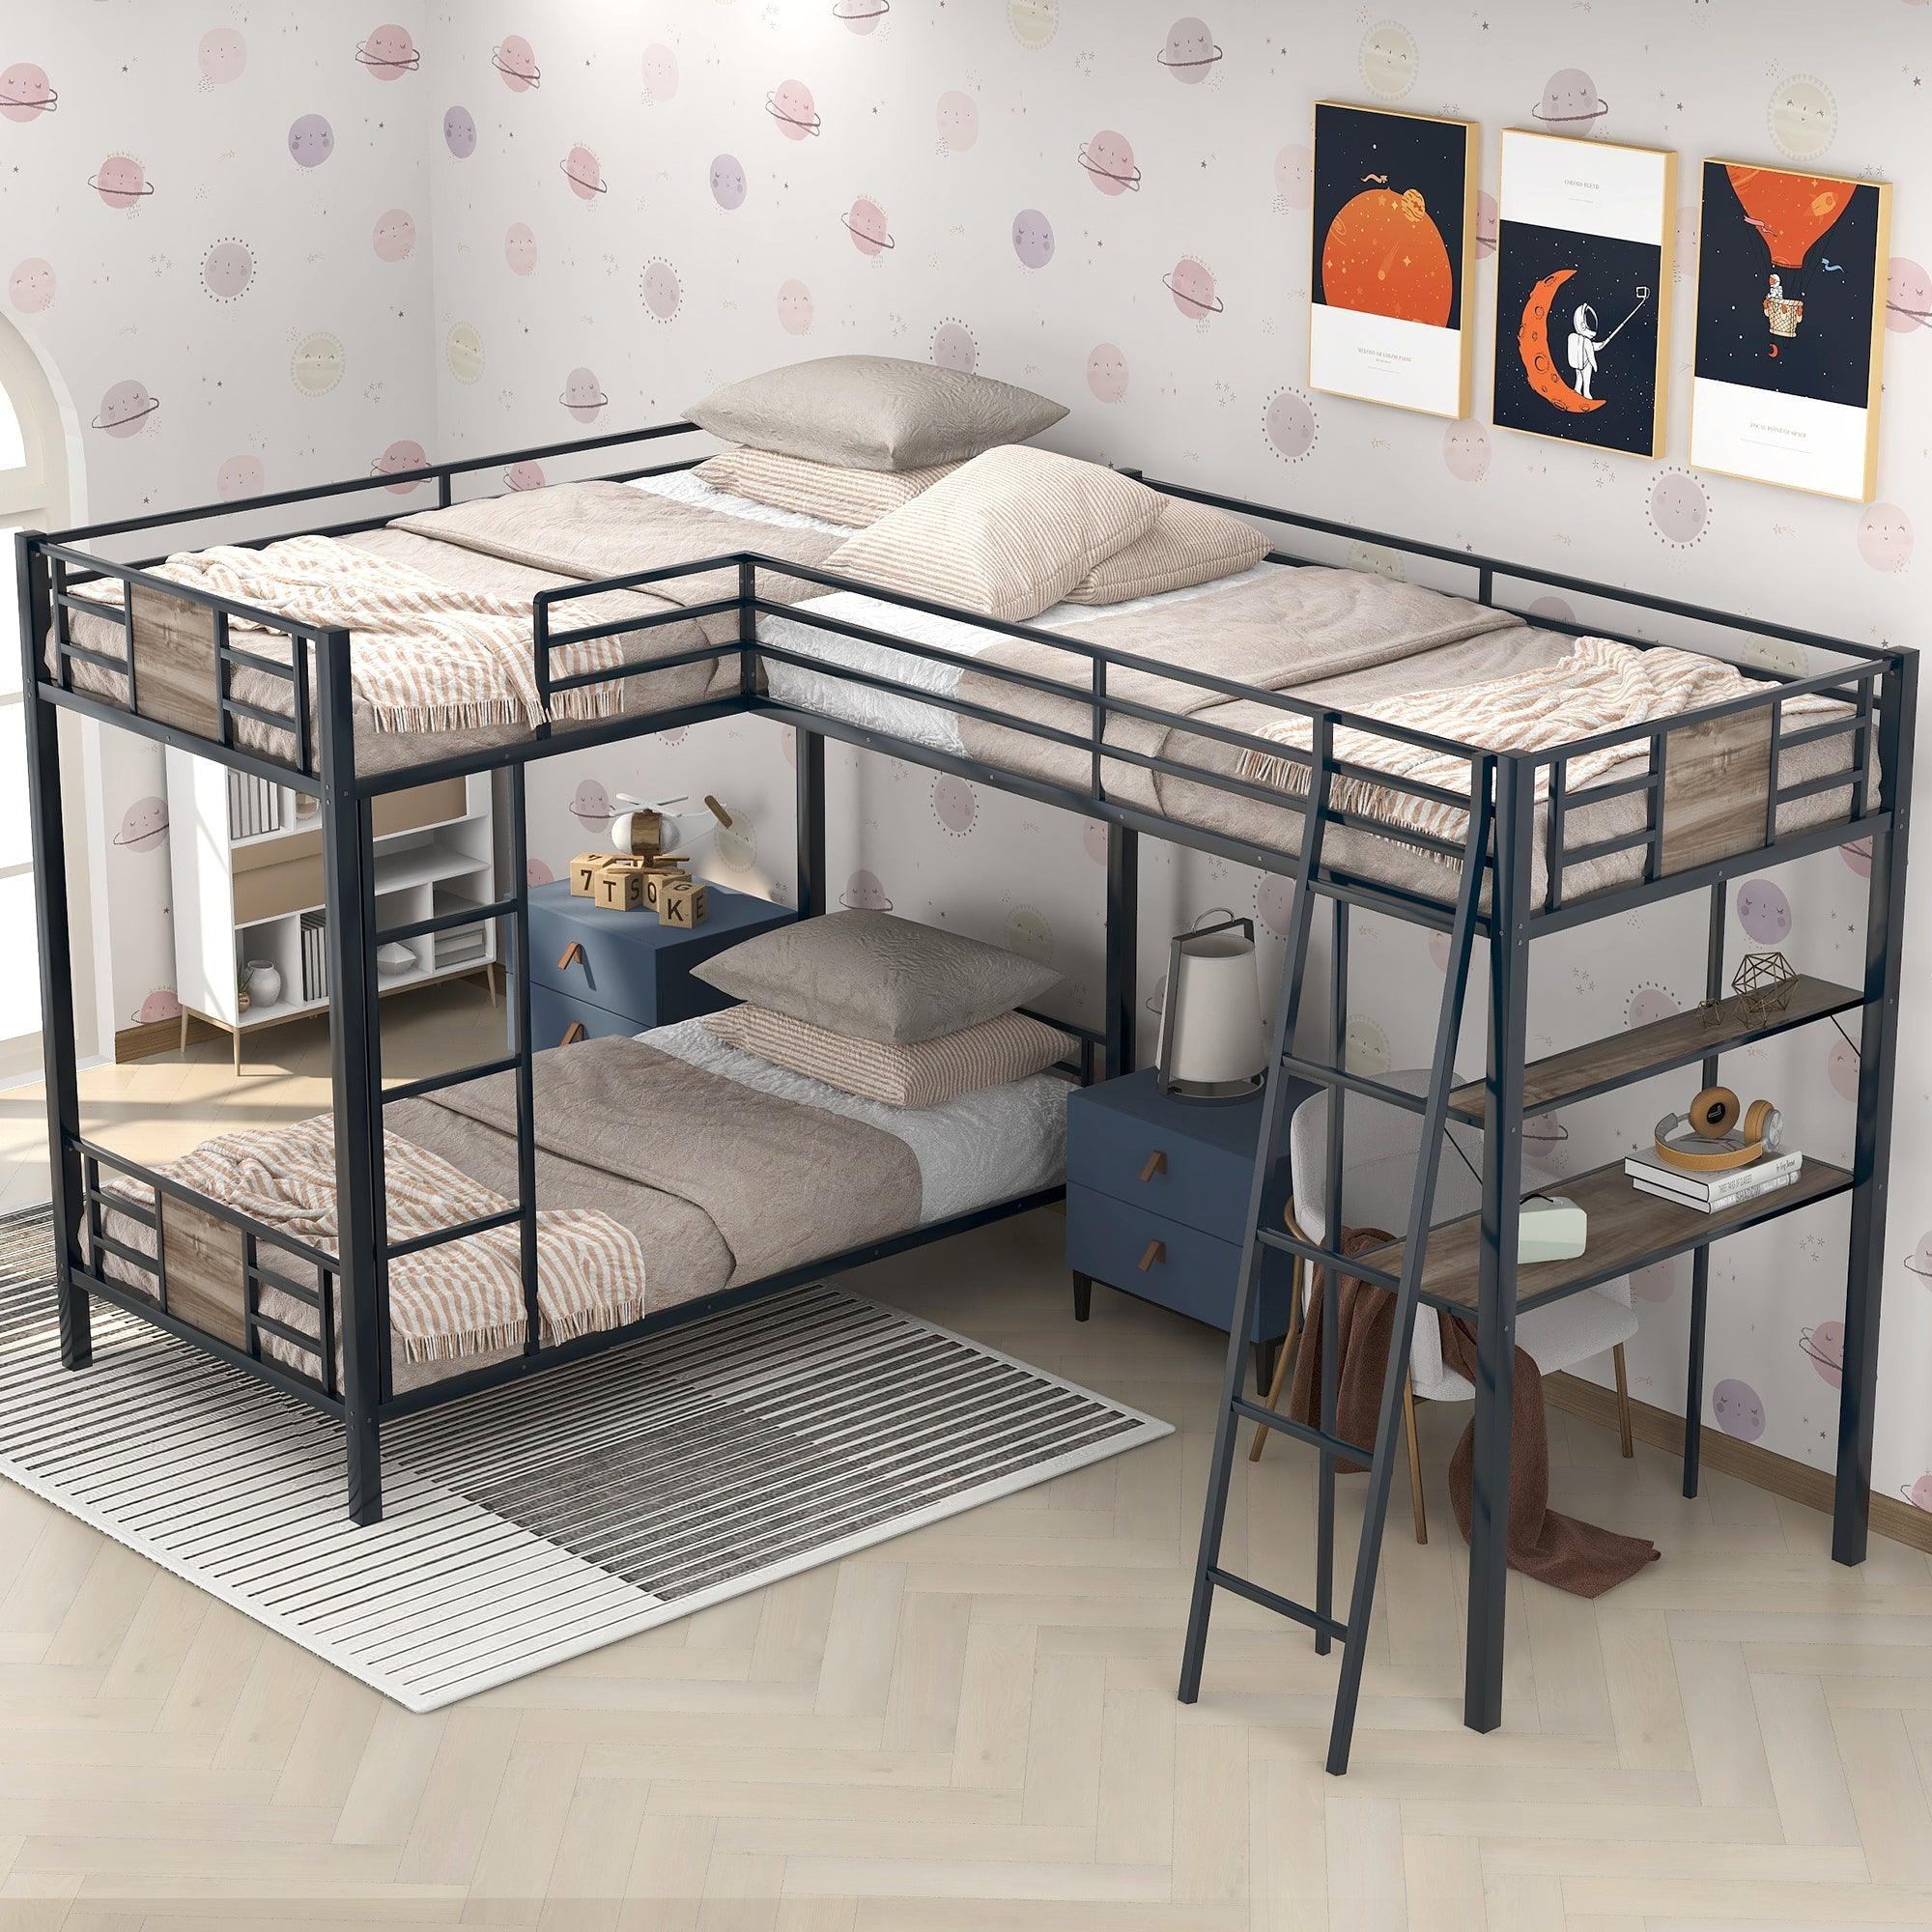 3-In-1 Bunk Bed Plus Loft Bed With Desk And Shelf, Brown LamCham